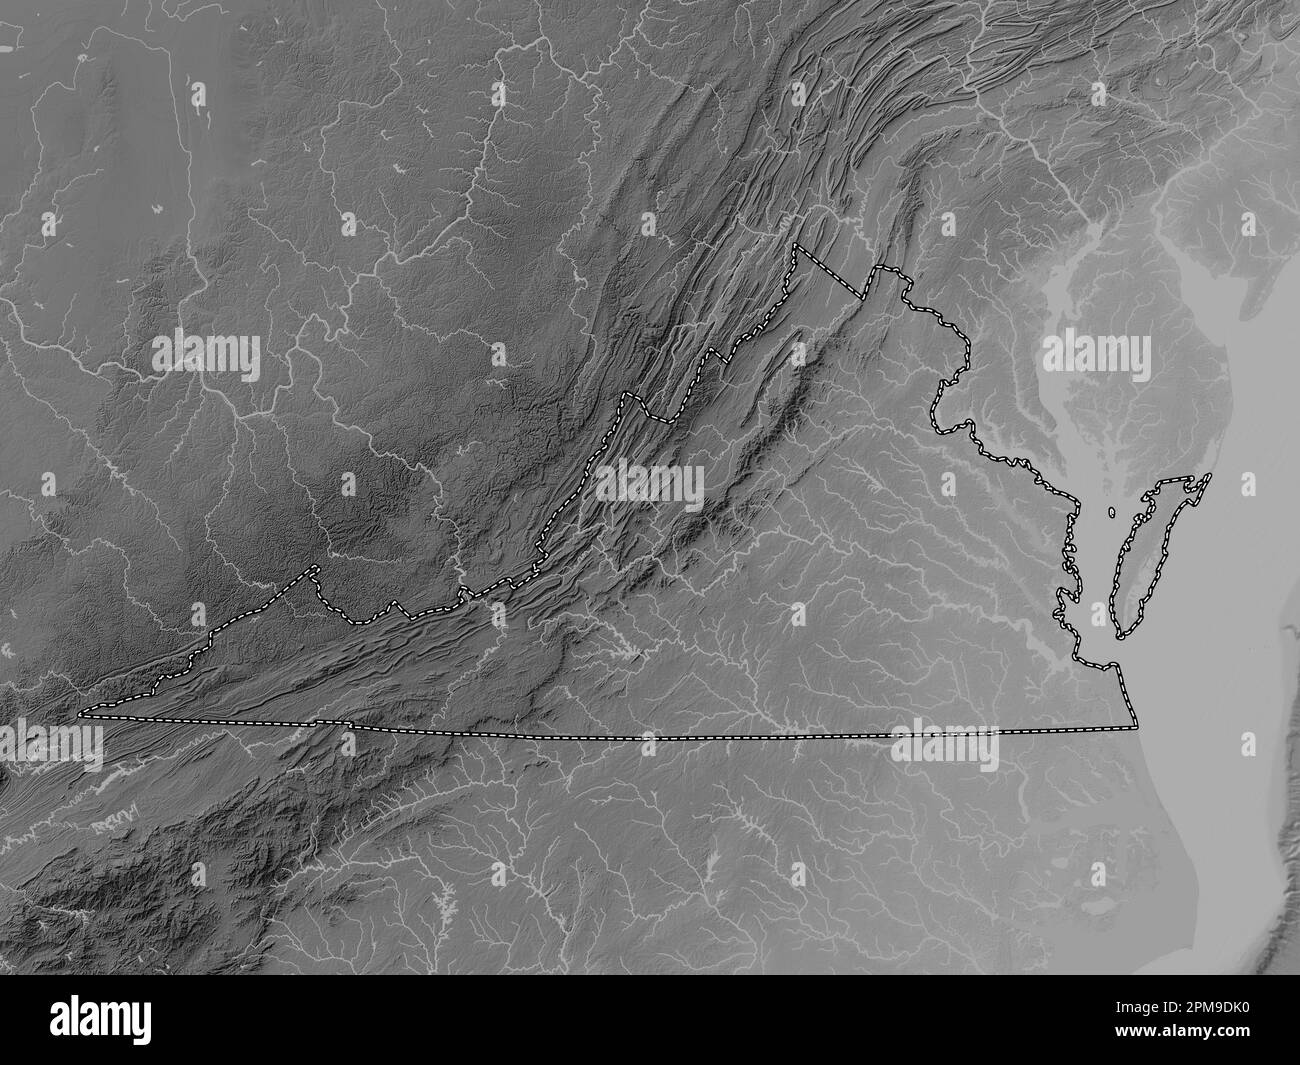 Virginia, state of United States of America. Grayscale elevation map with lakes and rivers Stock Photo